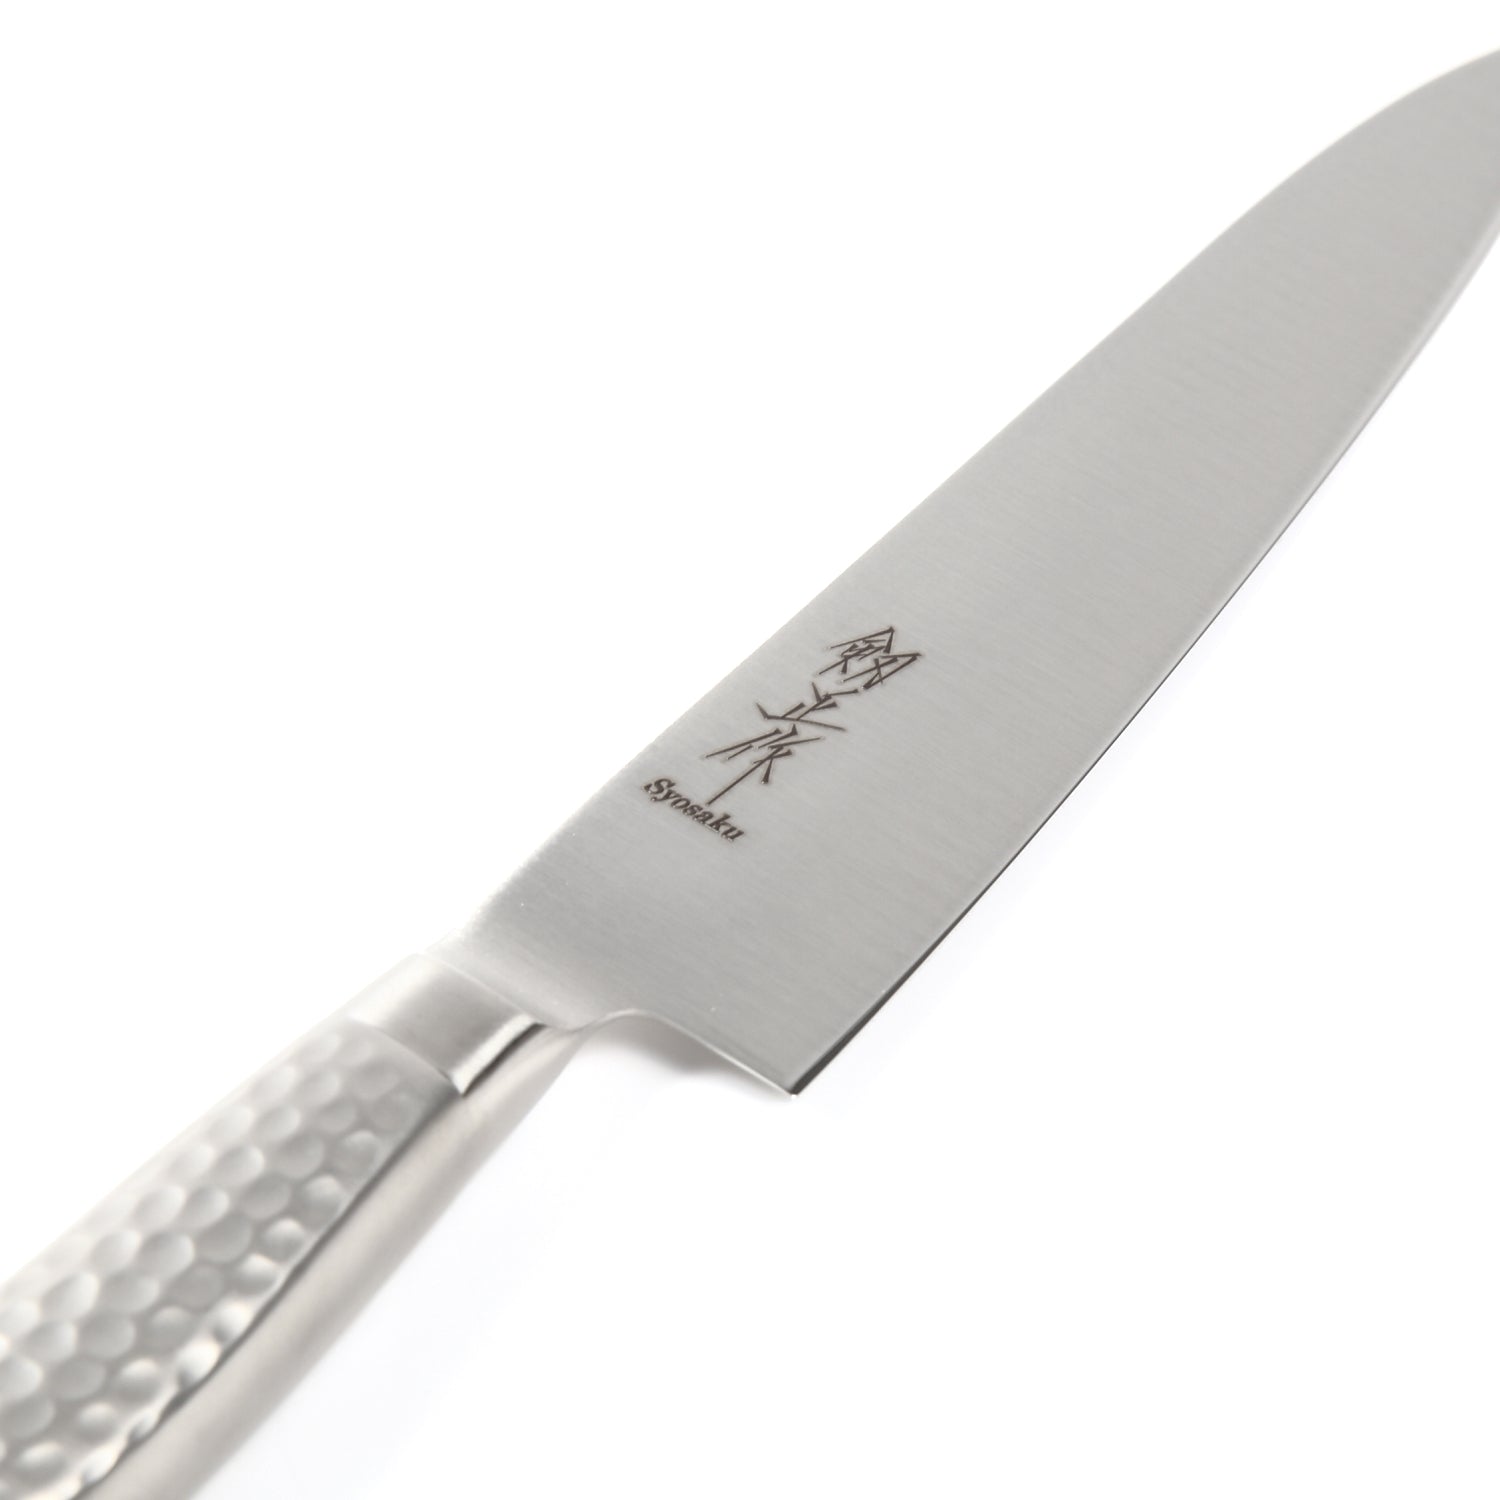 All Steel small chef knife